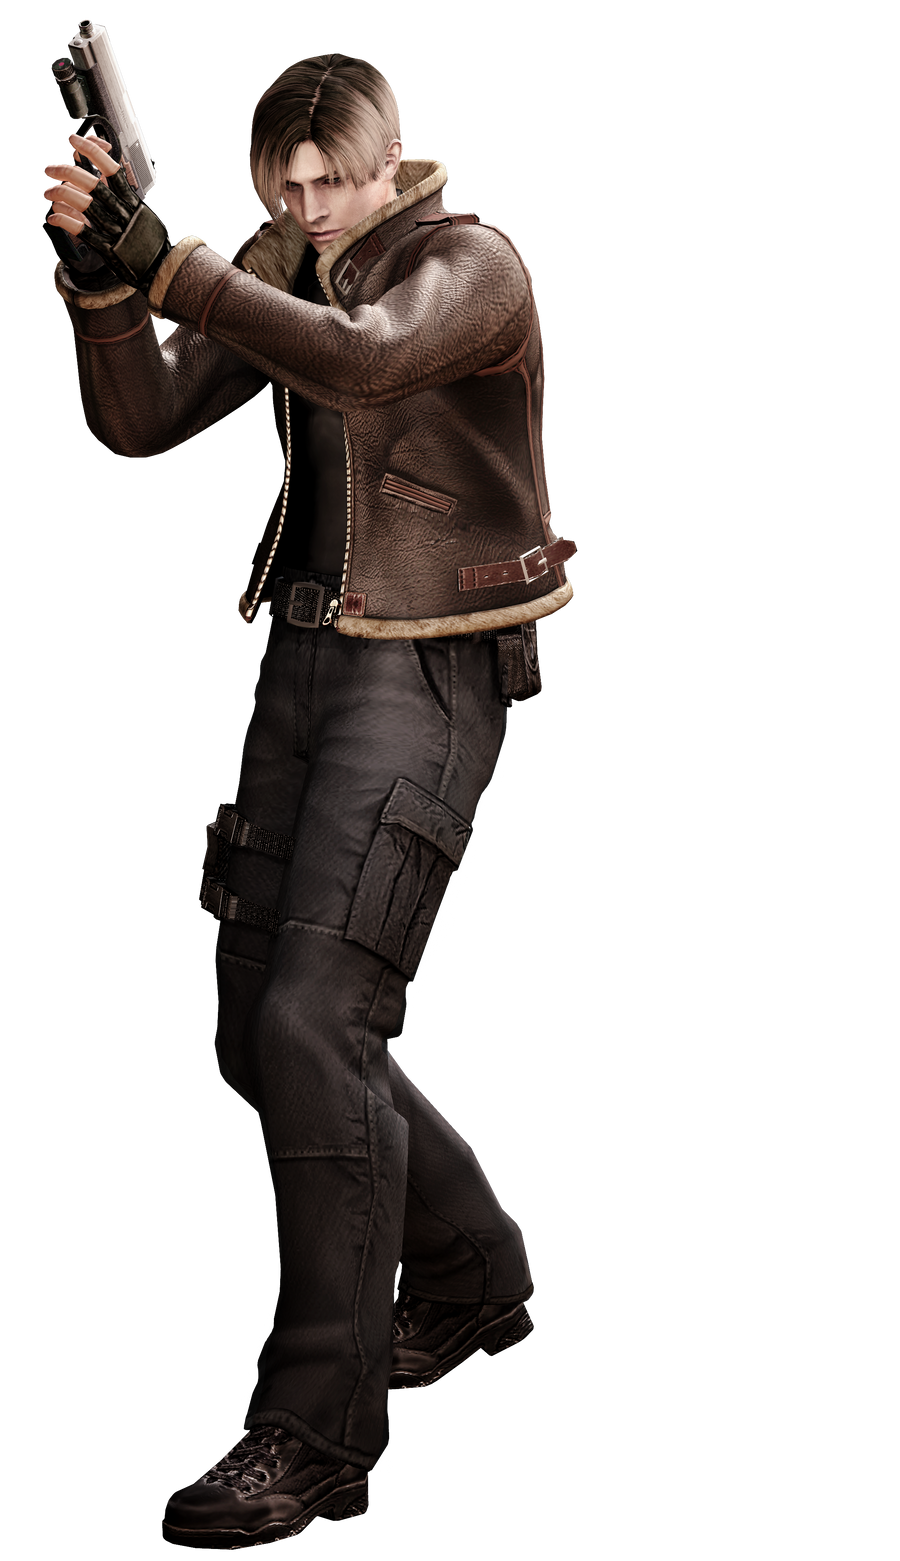 leon__1_re4___professional_render_by_allan_valentine-d599nzo.png